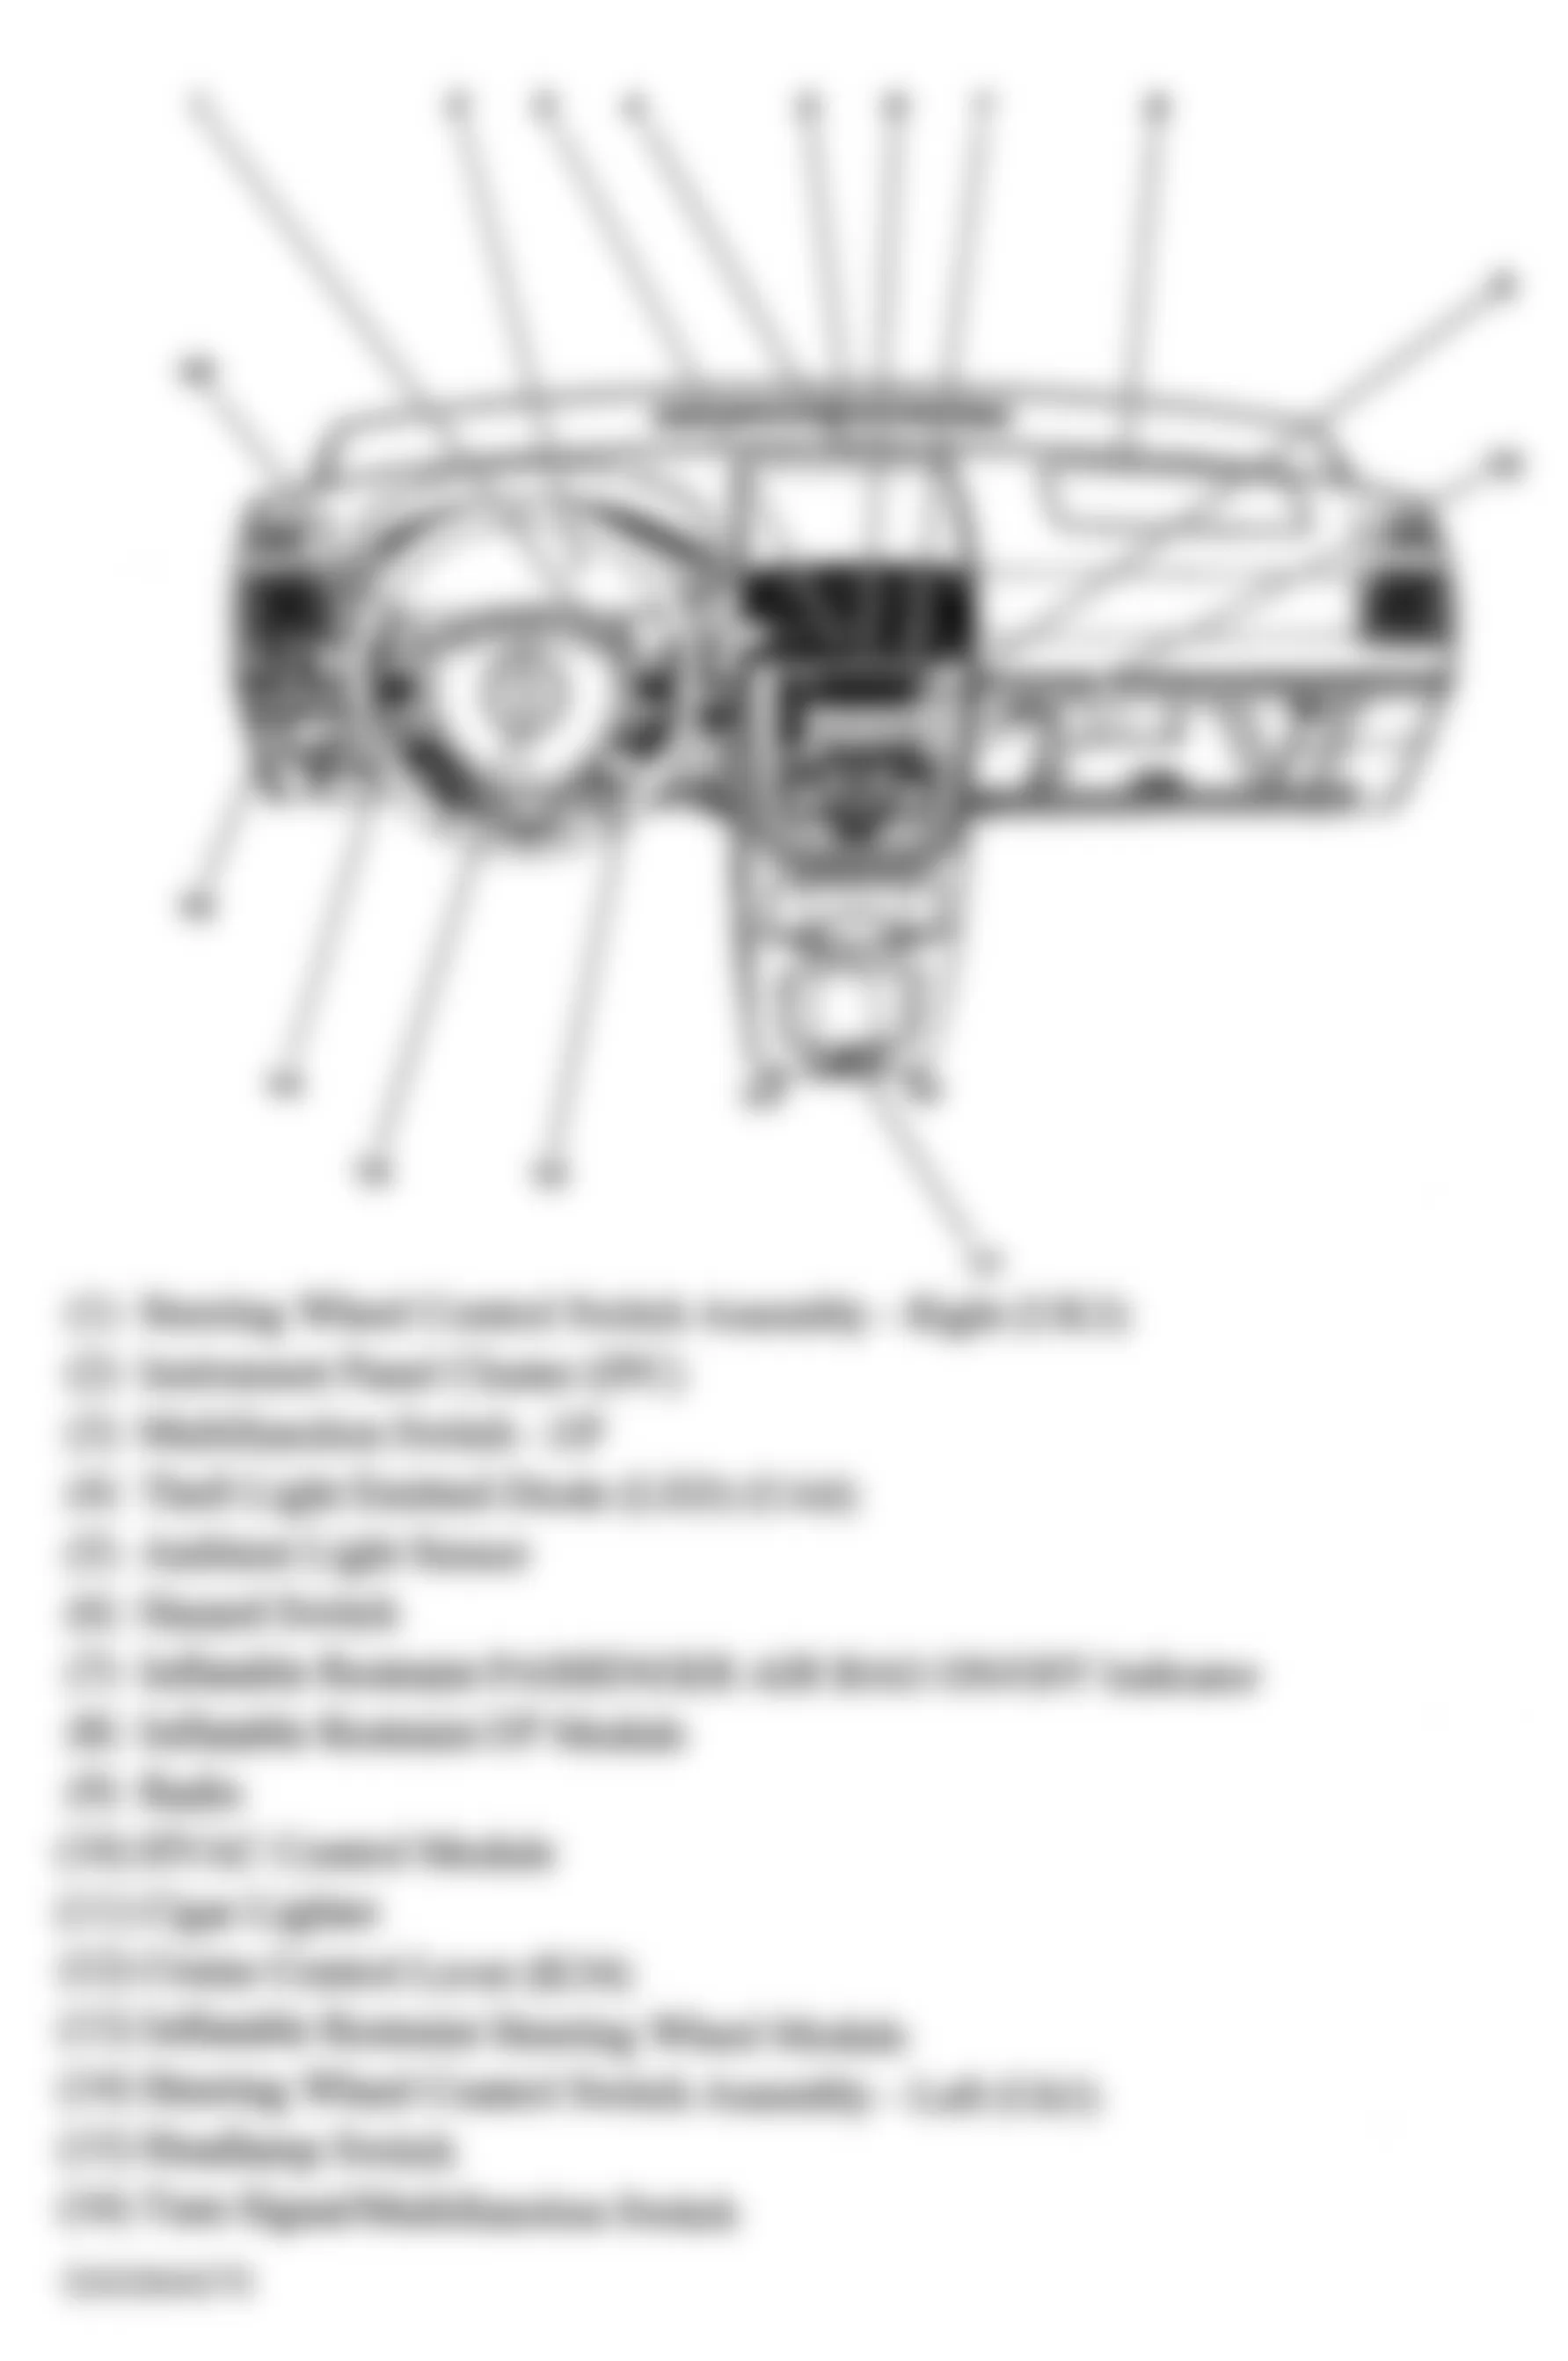 Buick Terraza CXL 2006 - Component Locations -  Dash Assembly